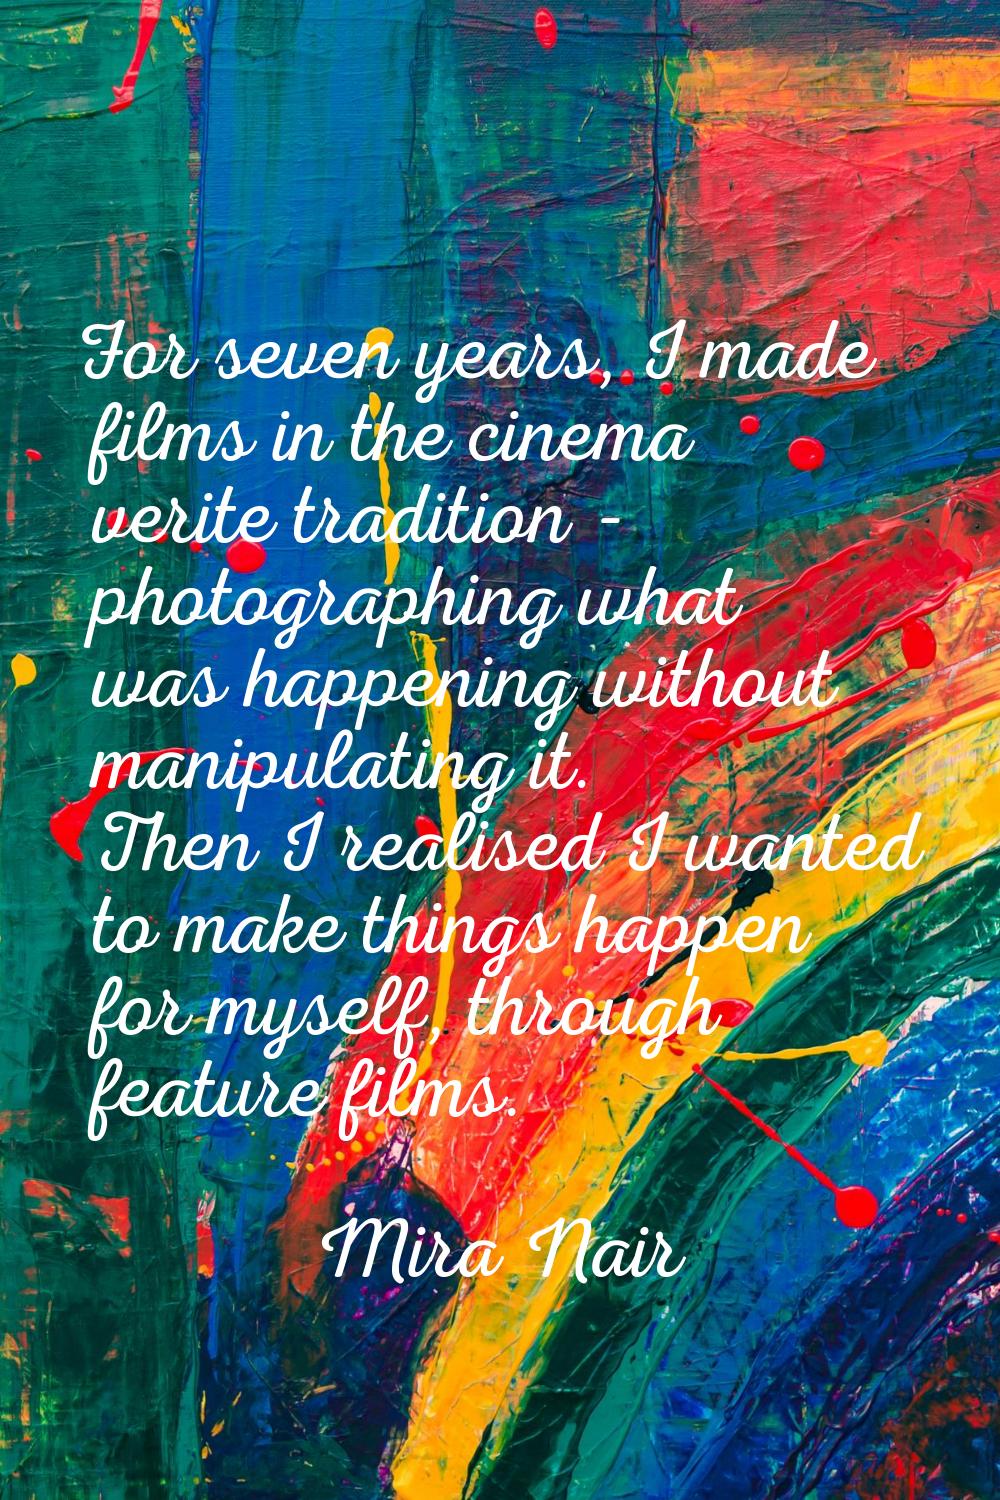 For seven years, I made films in the cinema verite tradition - photographing what was happening wit